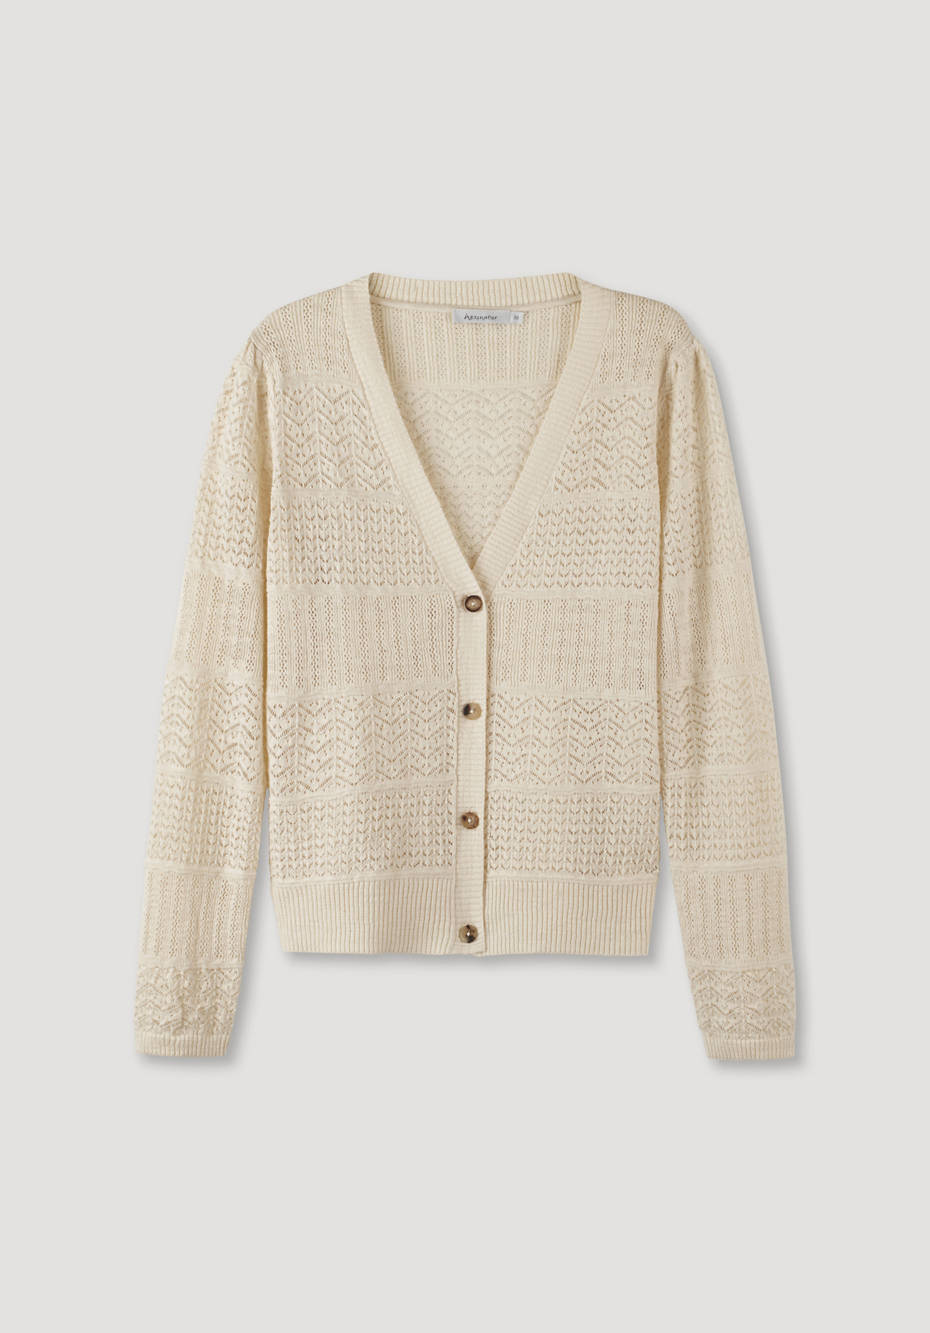 Openwork cardigan made of linen with organic cotton